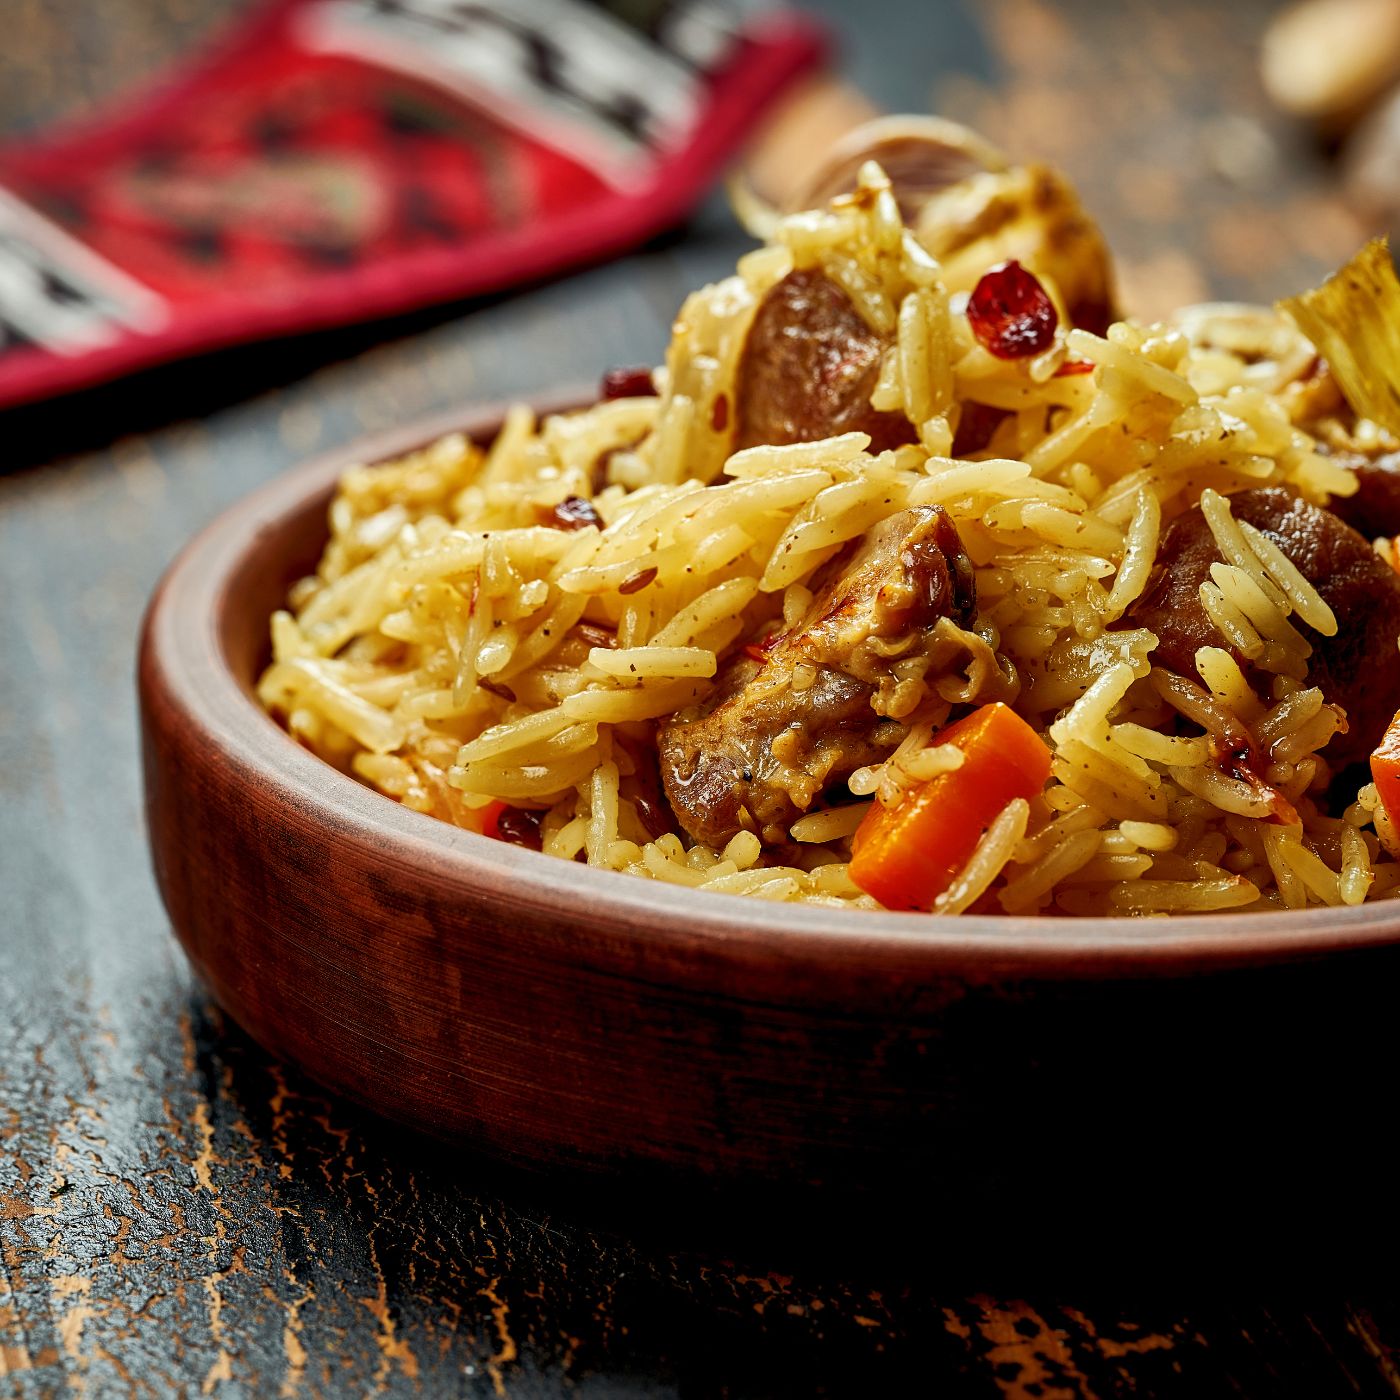 Classic-pilaf-with-beef,-garlic-and-carrots-in-a-clay-plate-on-a-wooden-background.-Rustic-1475006864_3869x2579 square.jpeg